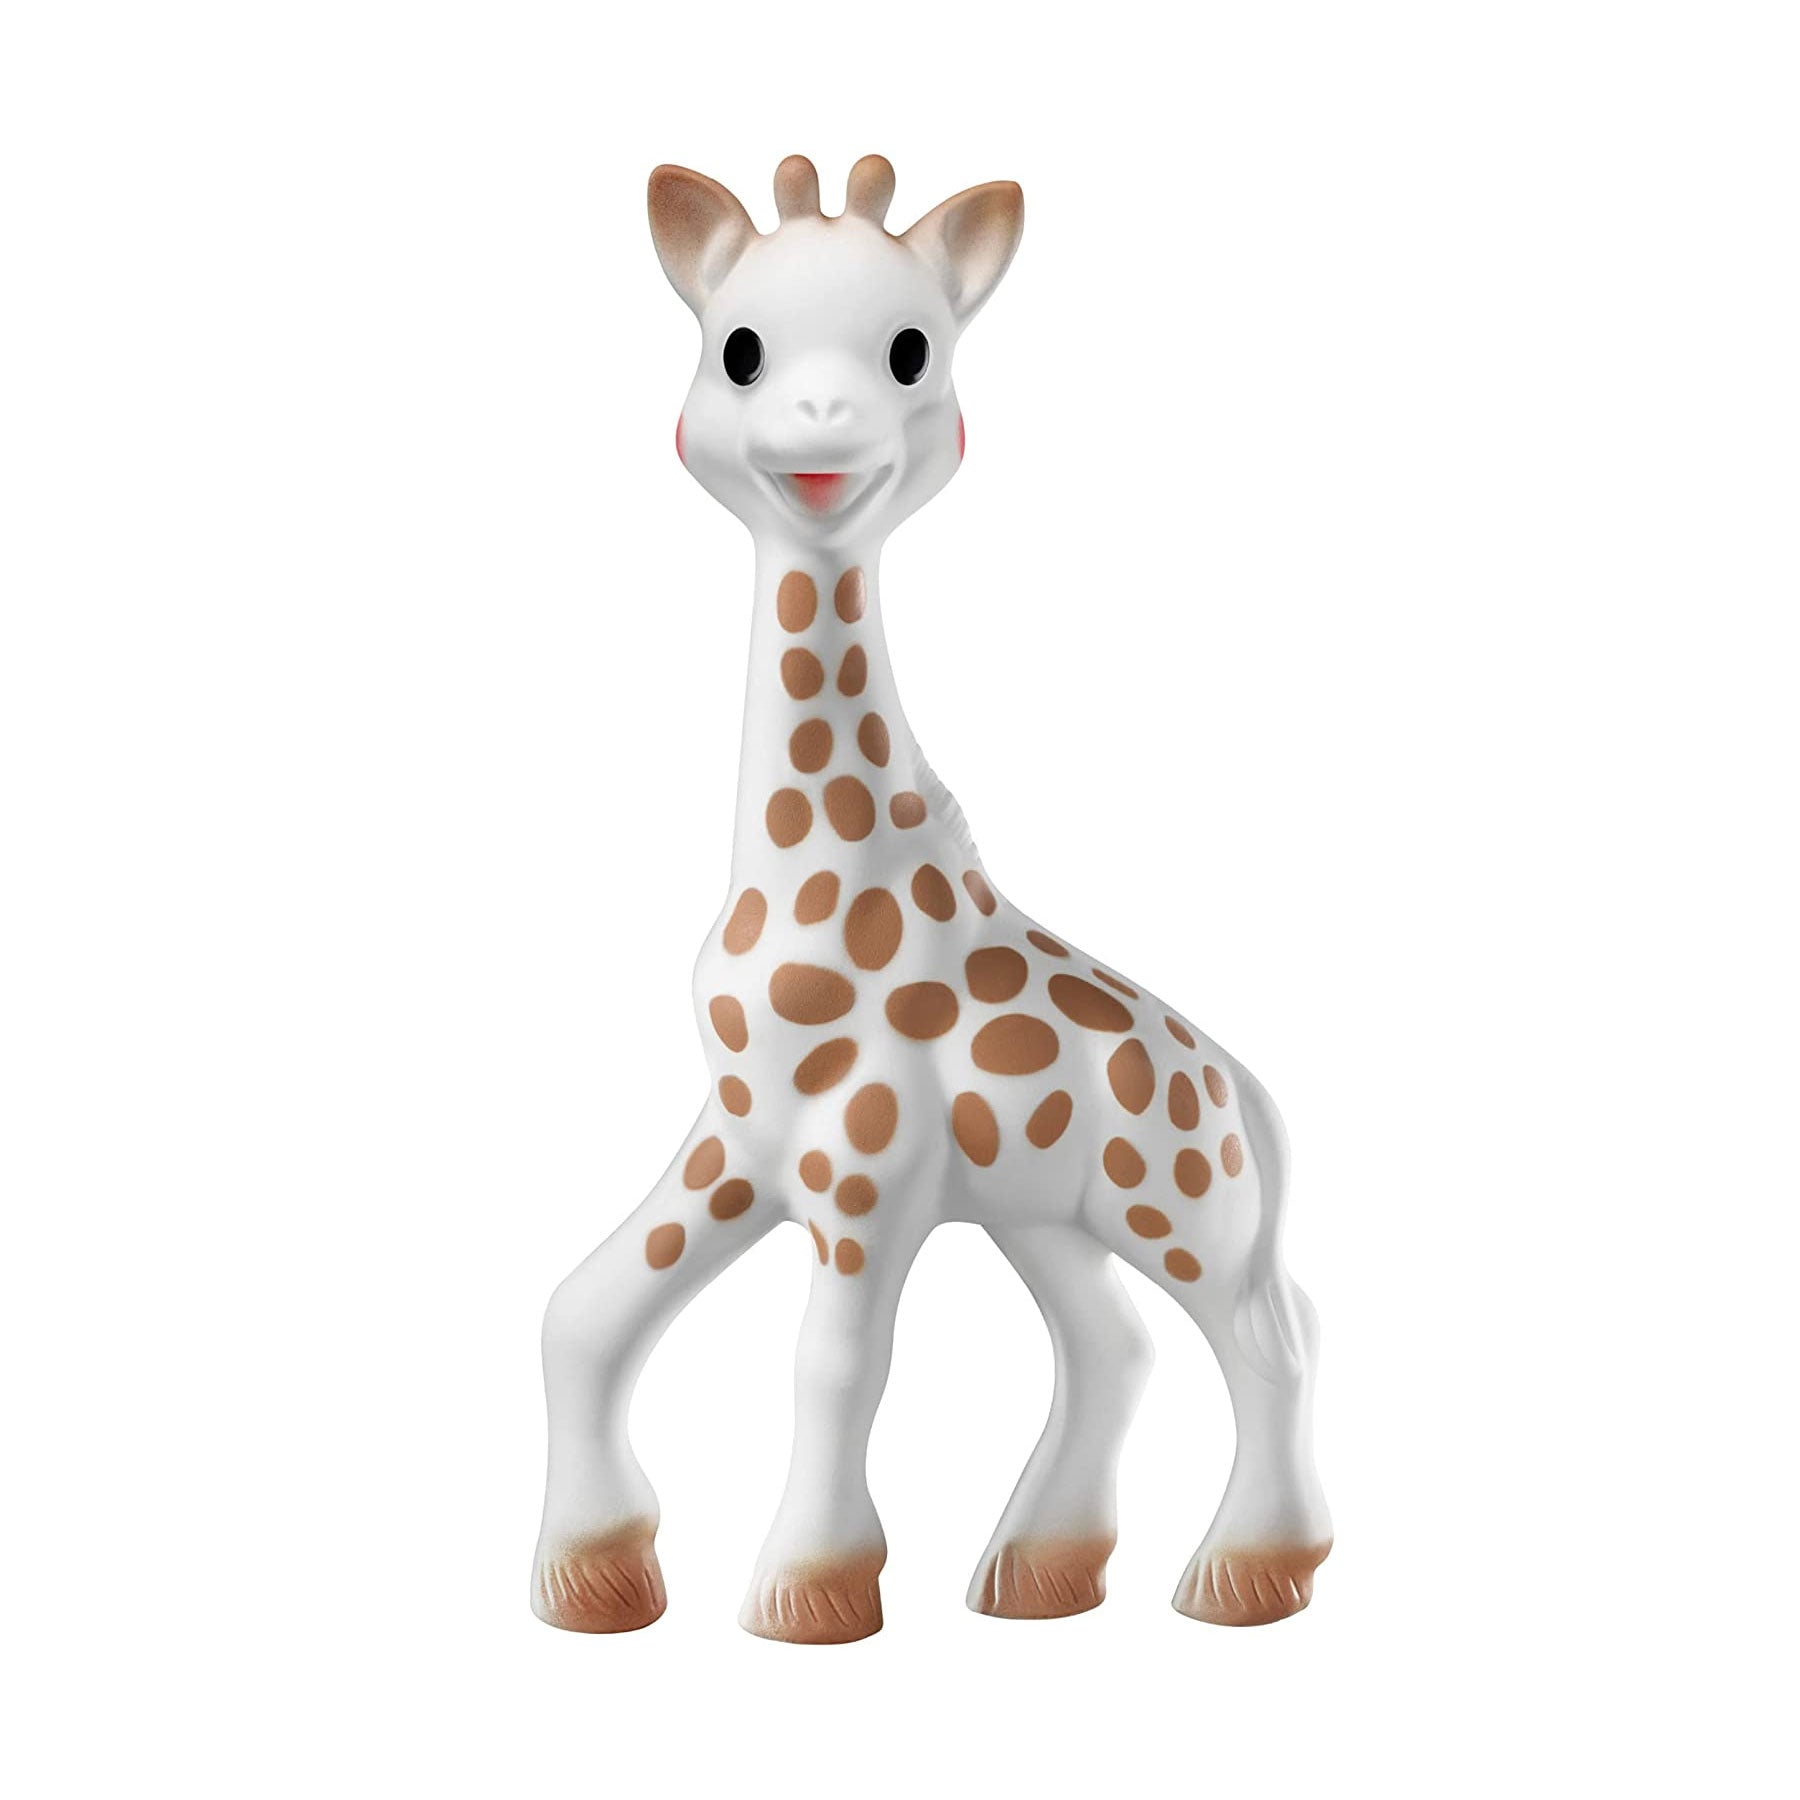 100% natural rubber.teether toy.. Original Sophie La Girafe presented in attractive gift box.